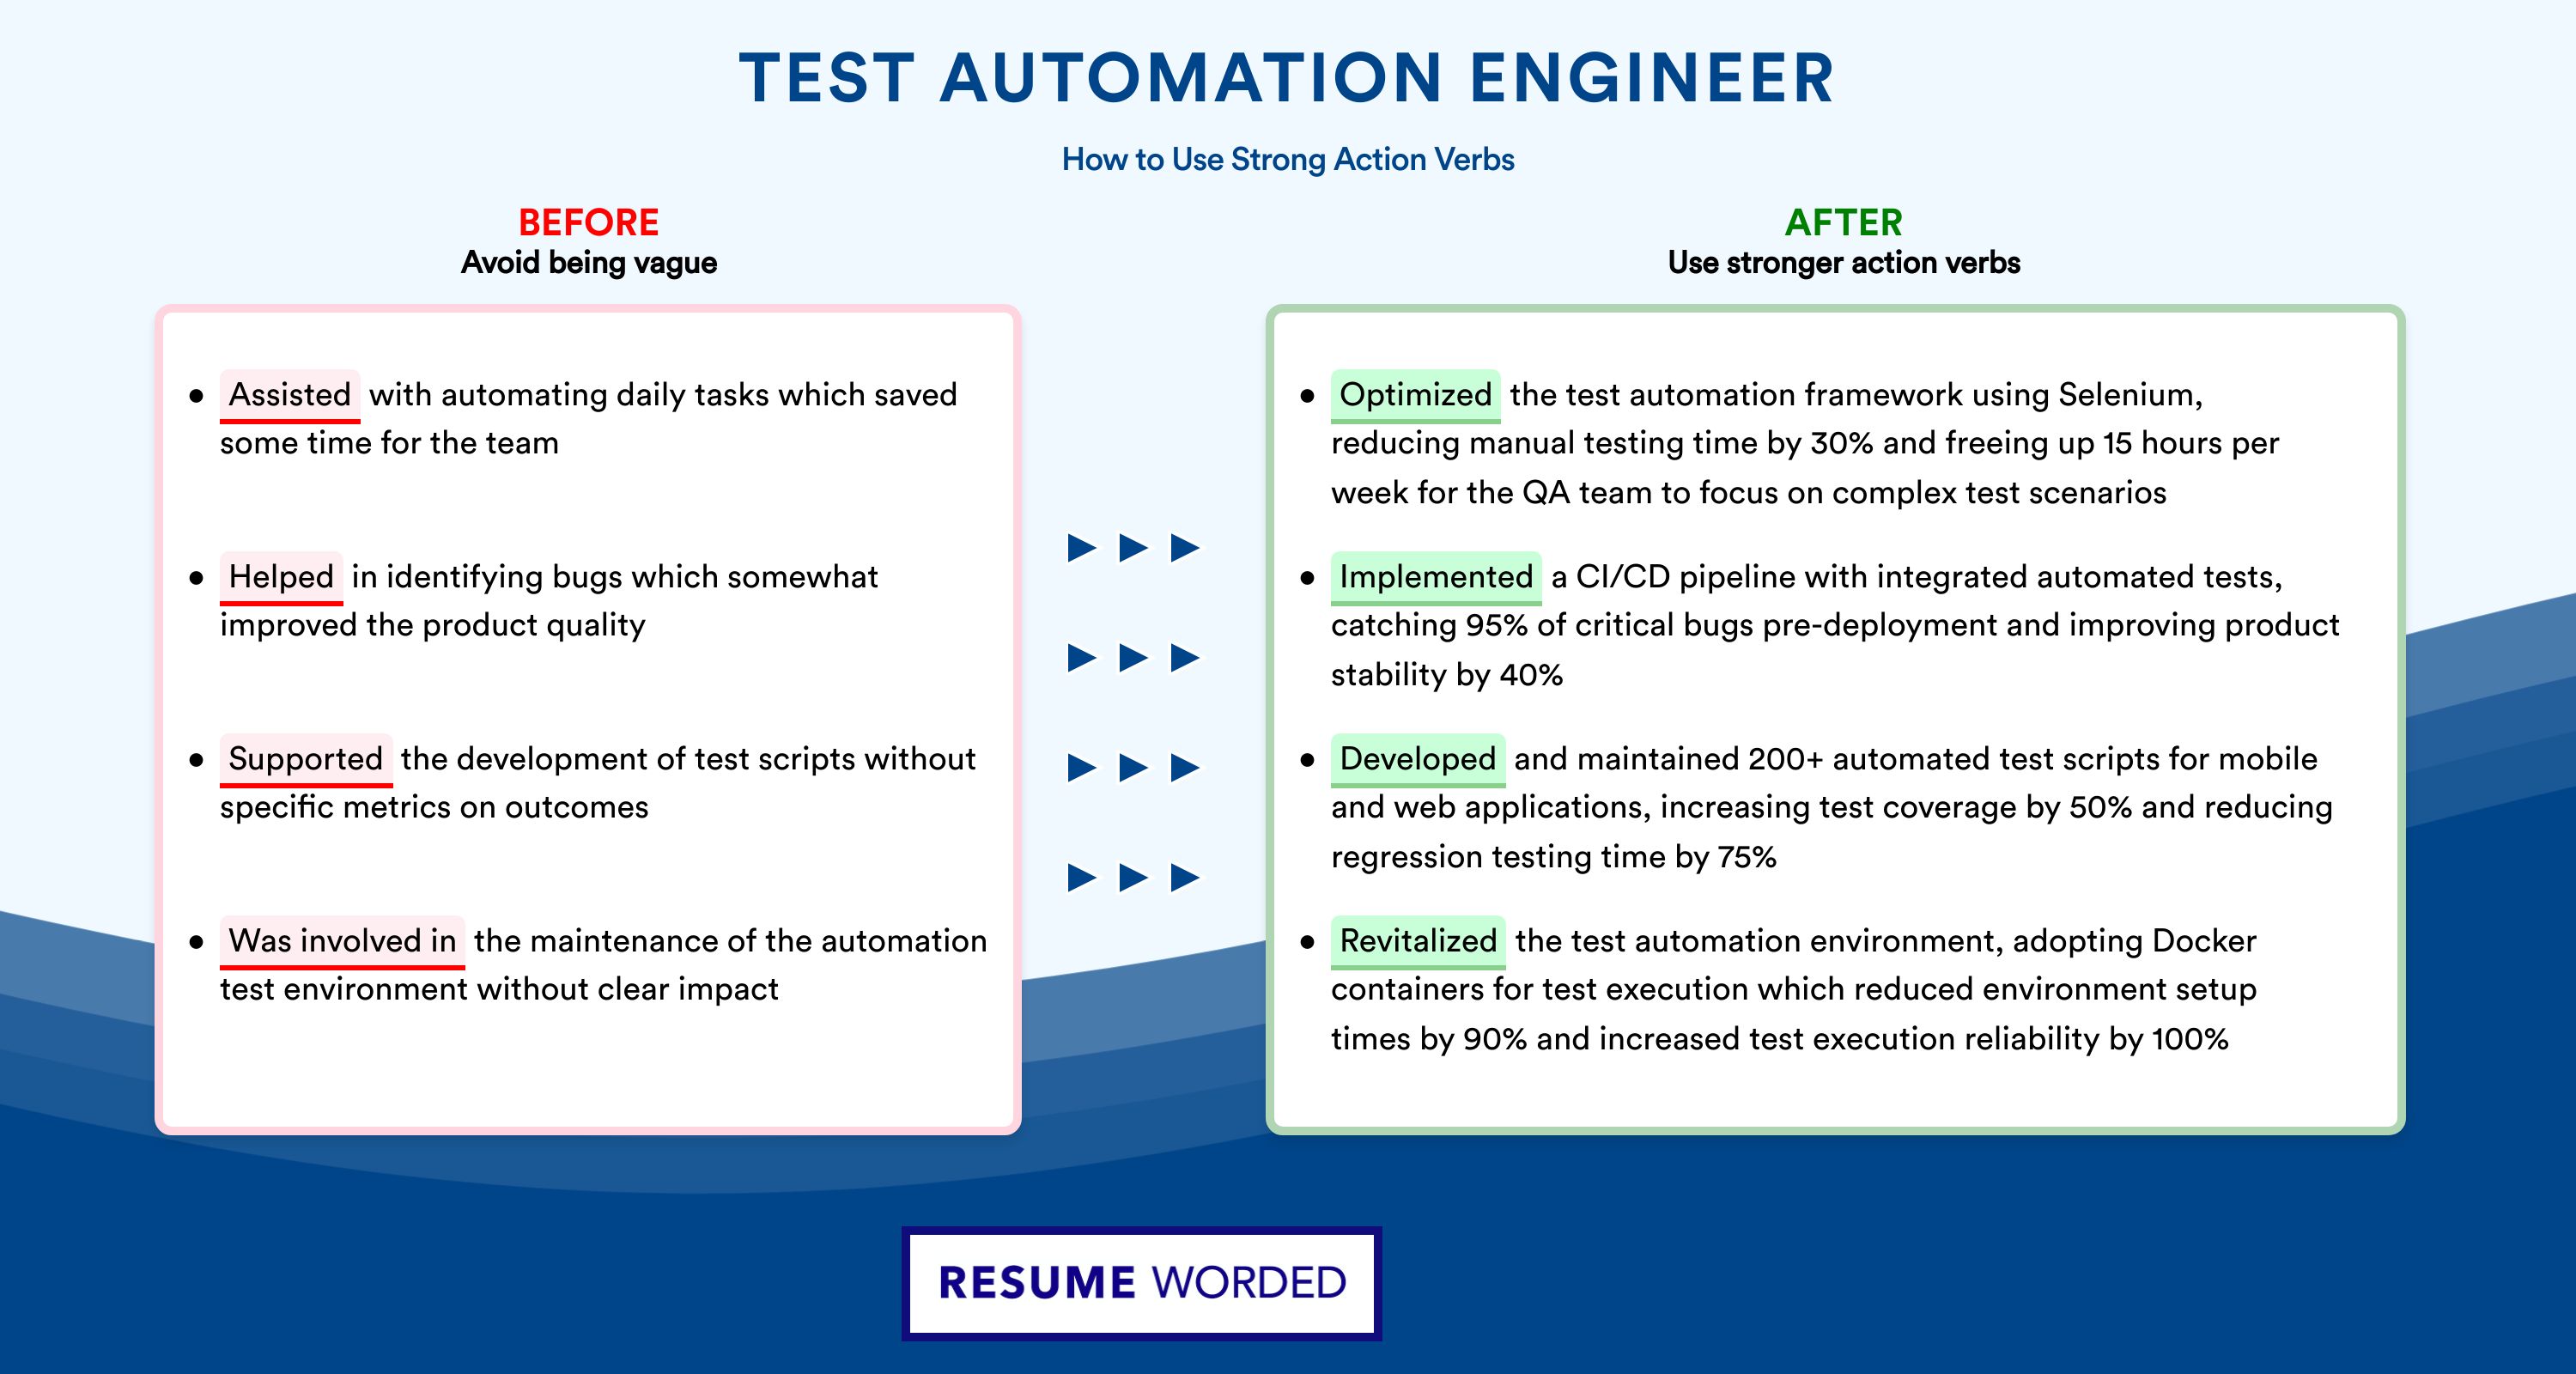 Action Verbs for Test Automation Engineer